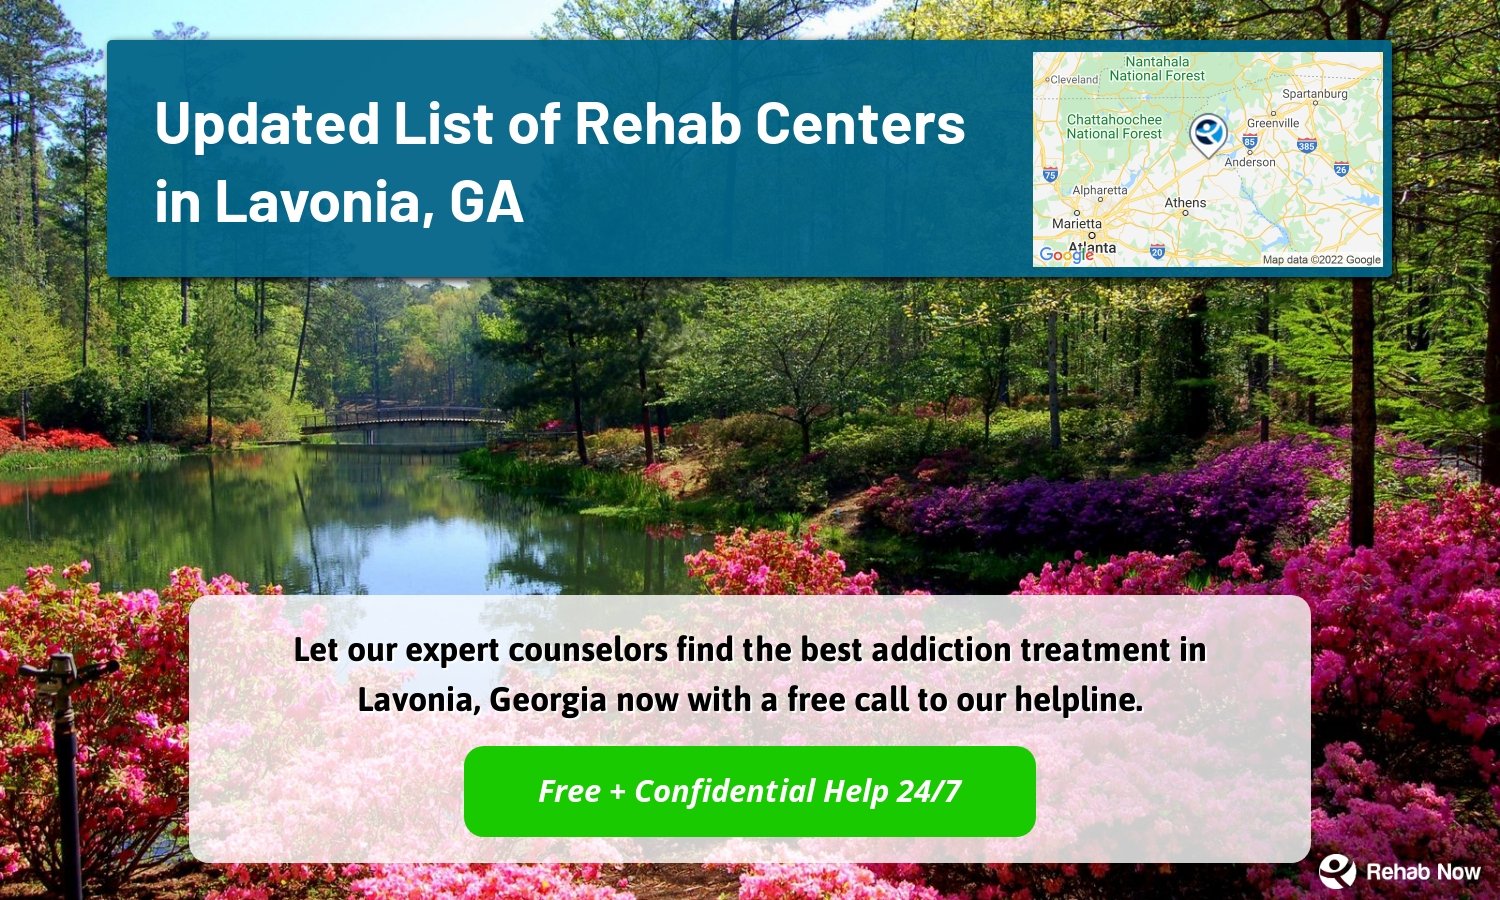 Let our expert counselors find the best addiction treatment in Lavonia, Georgia now with a free call to our helpline.